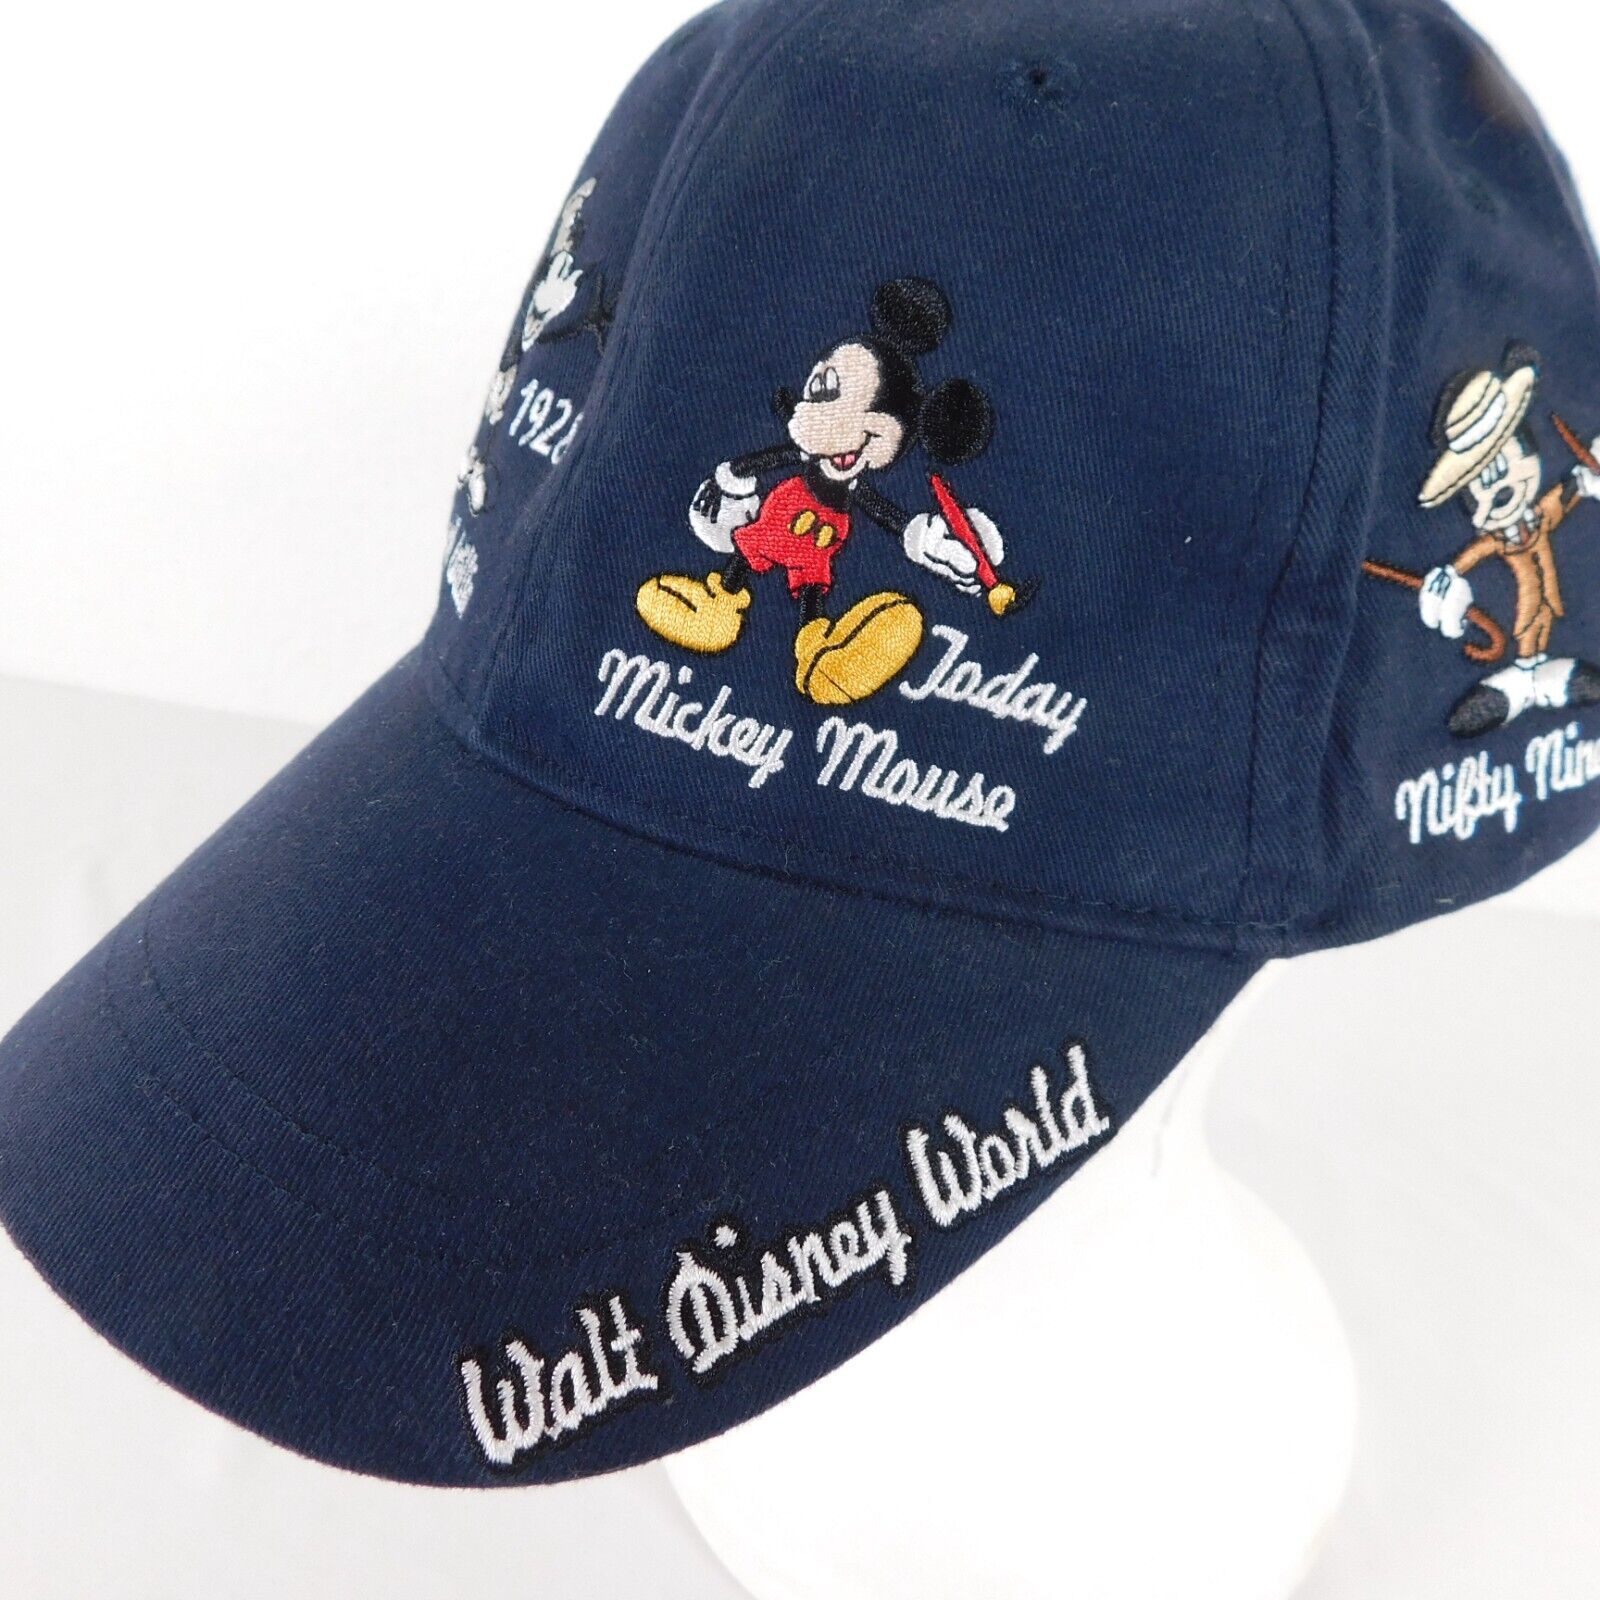 Primary image for Walt Disney World Hat Unisex Blue Baseball Cap Cotton Embroidered Mickey Mouse